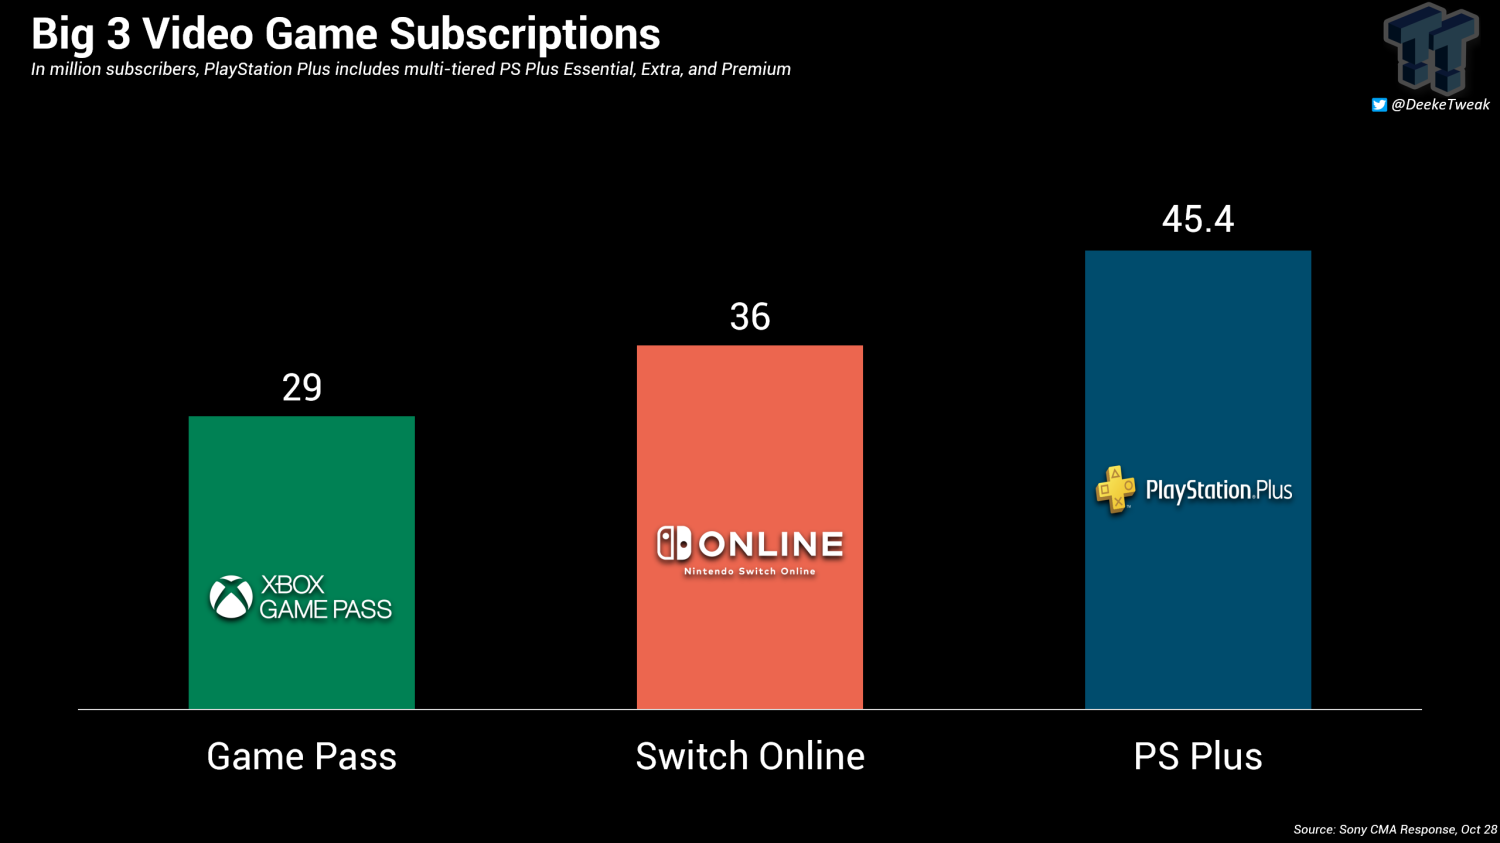 Xbox Game Pass vs PlayStation Now: which is the best game subscription  service?